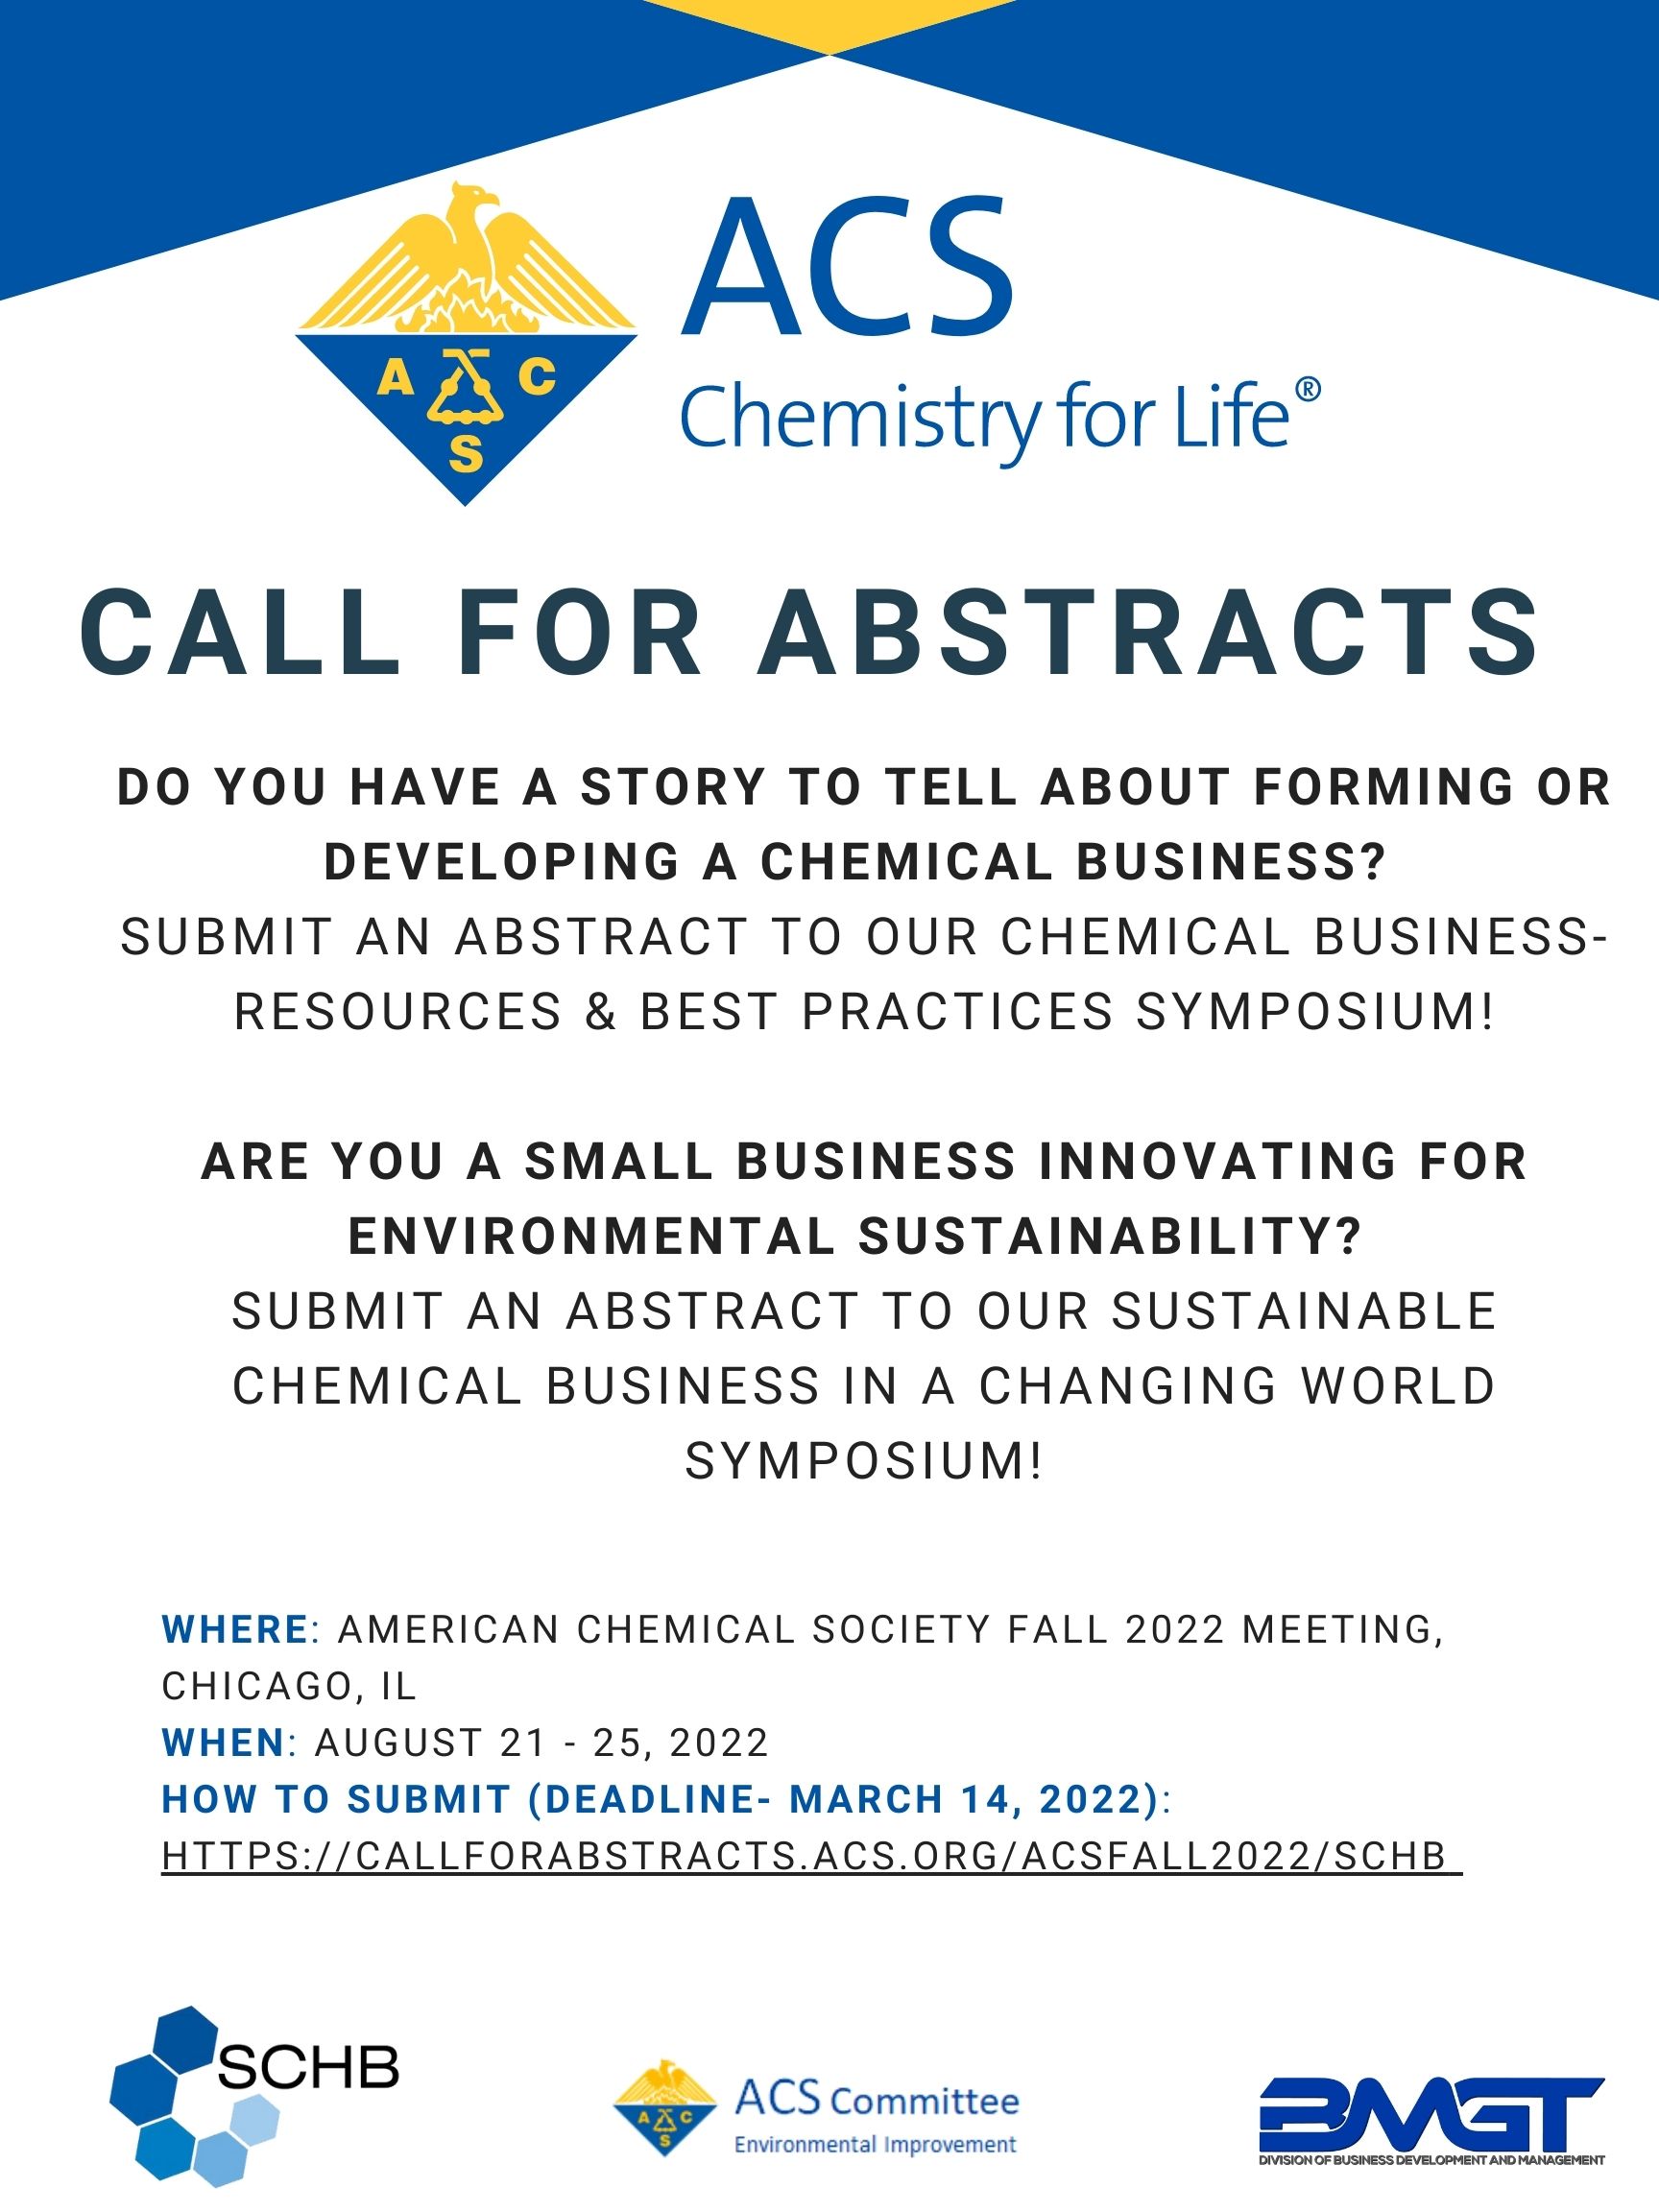 ACS Fall 2022 Call for Abstracts SCHB